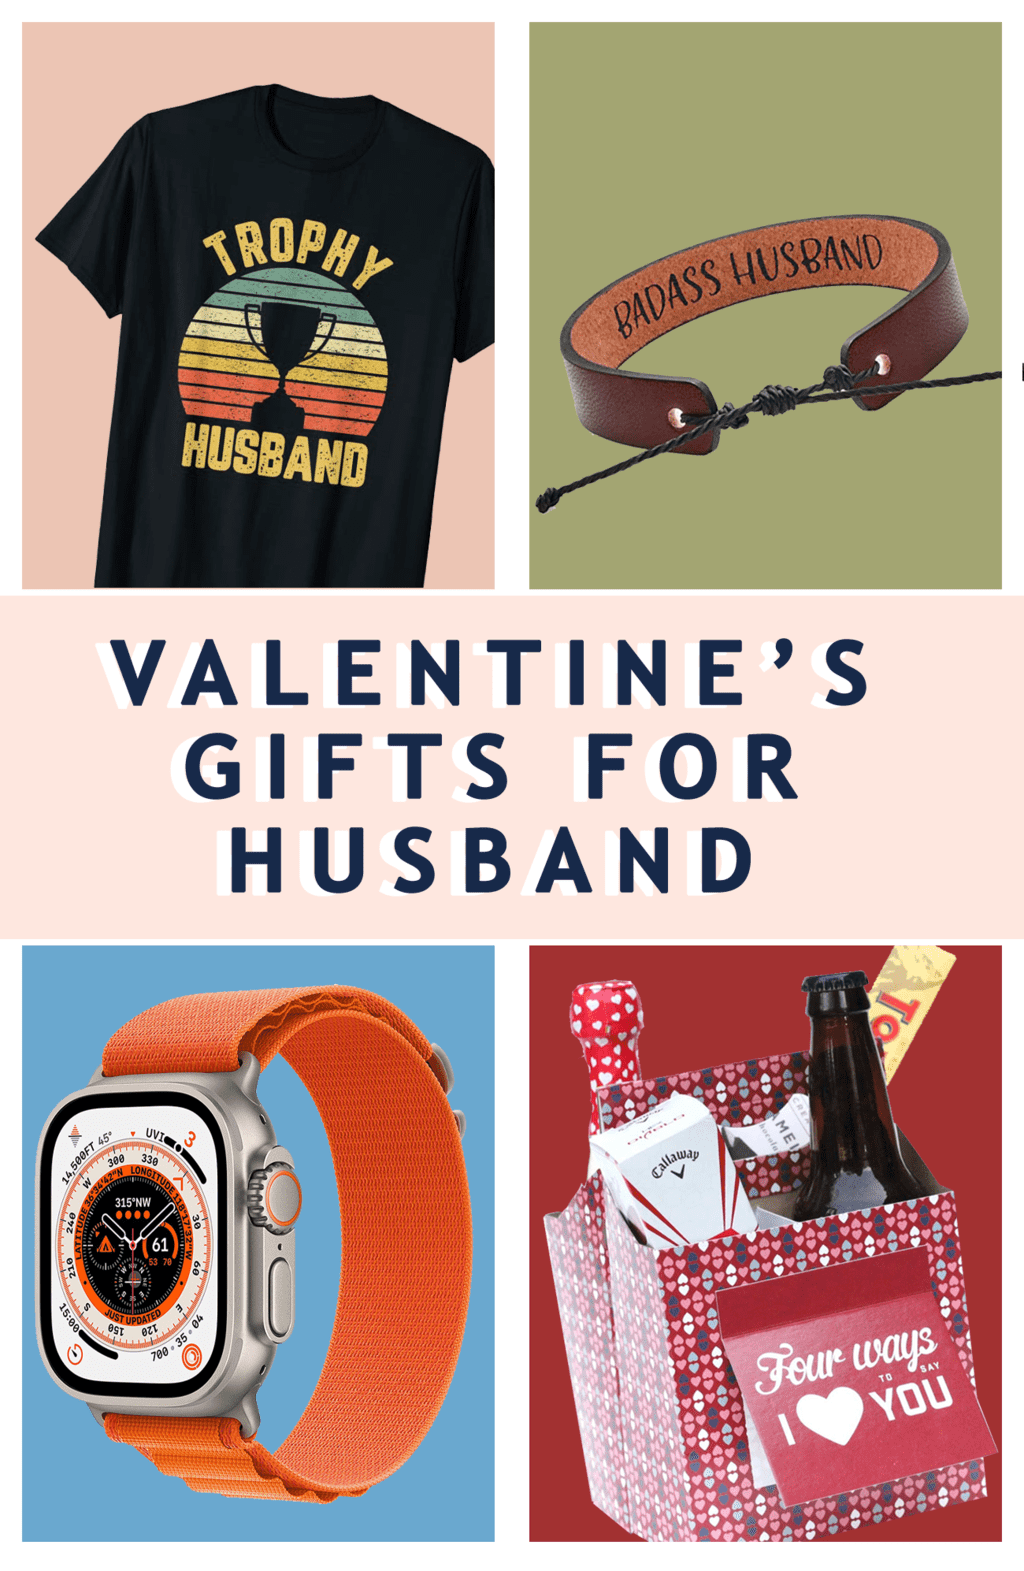 Valentines Gift for Husband Ideas by Sugar & Cloth